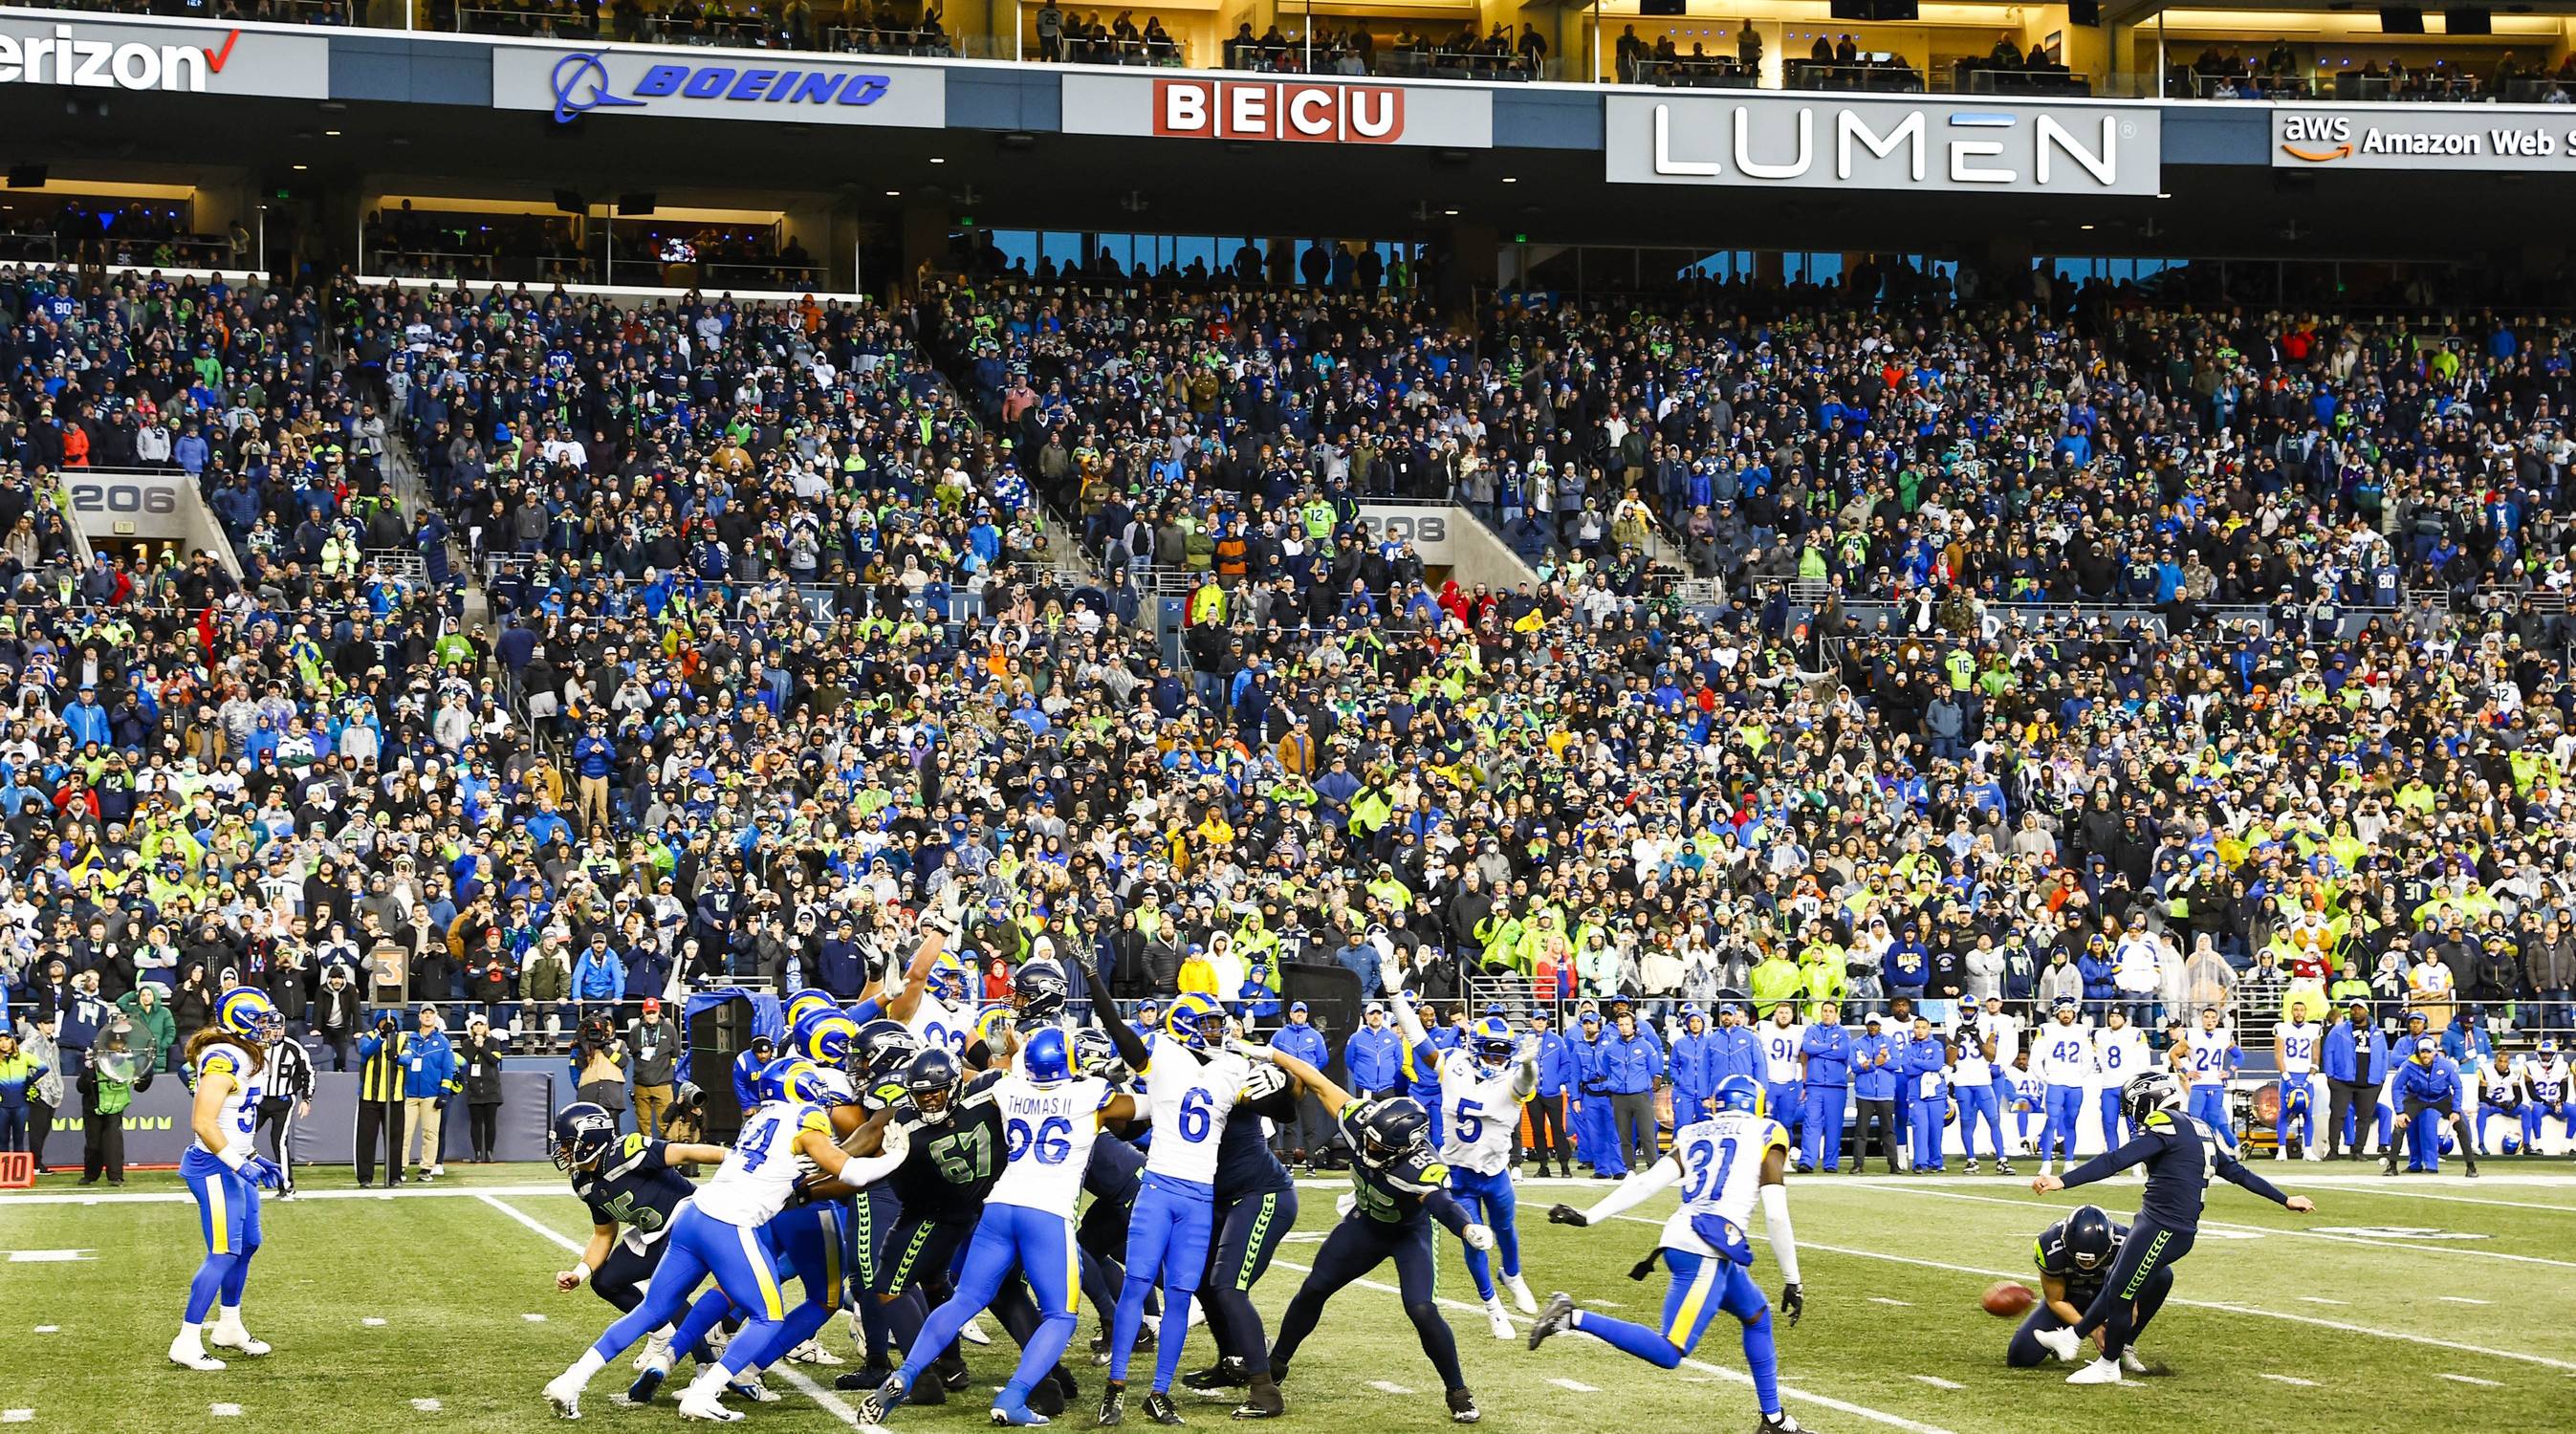 Rams-Seahawks Officiating Upset Executives and Coaches, per Report